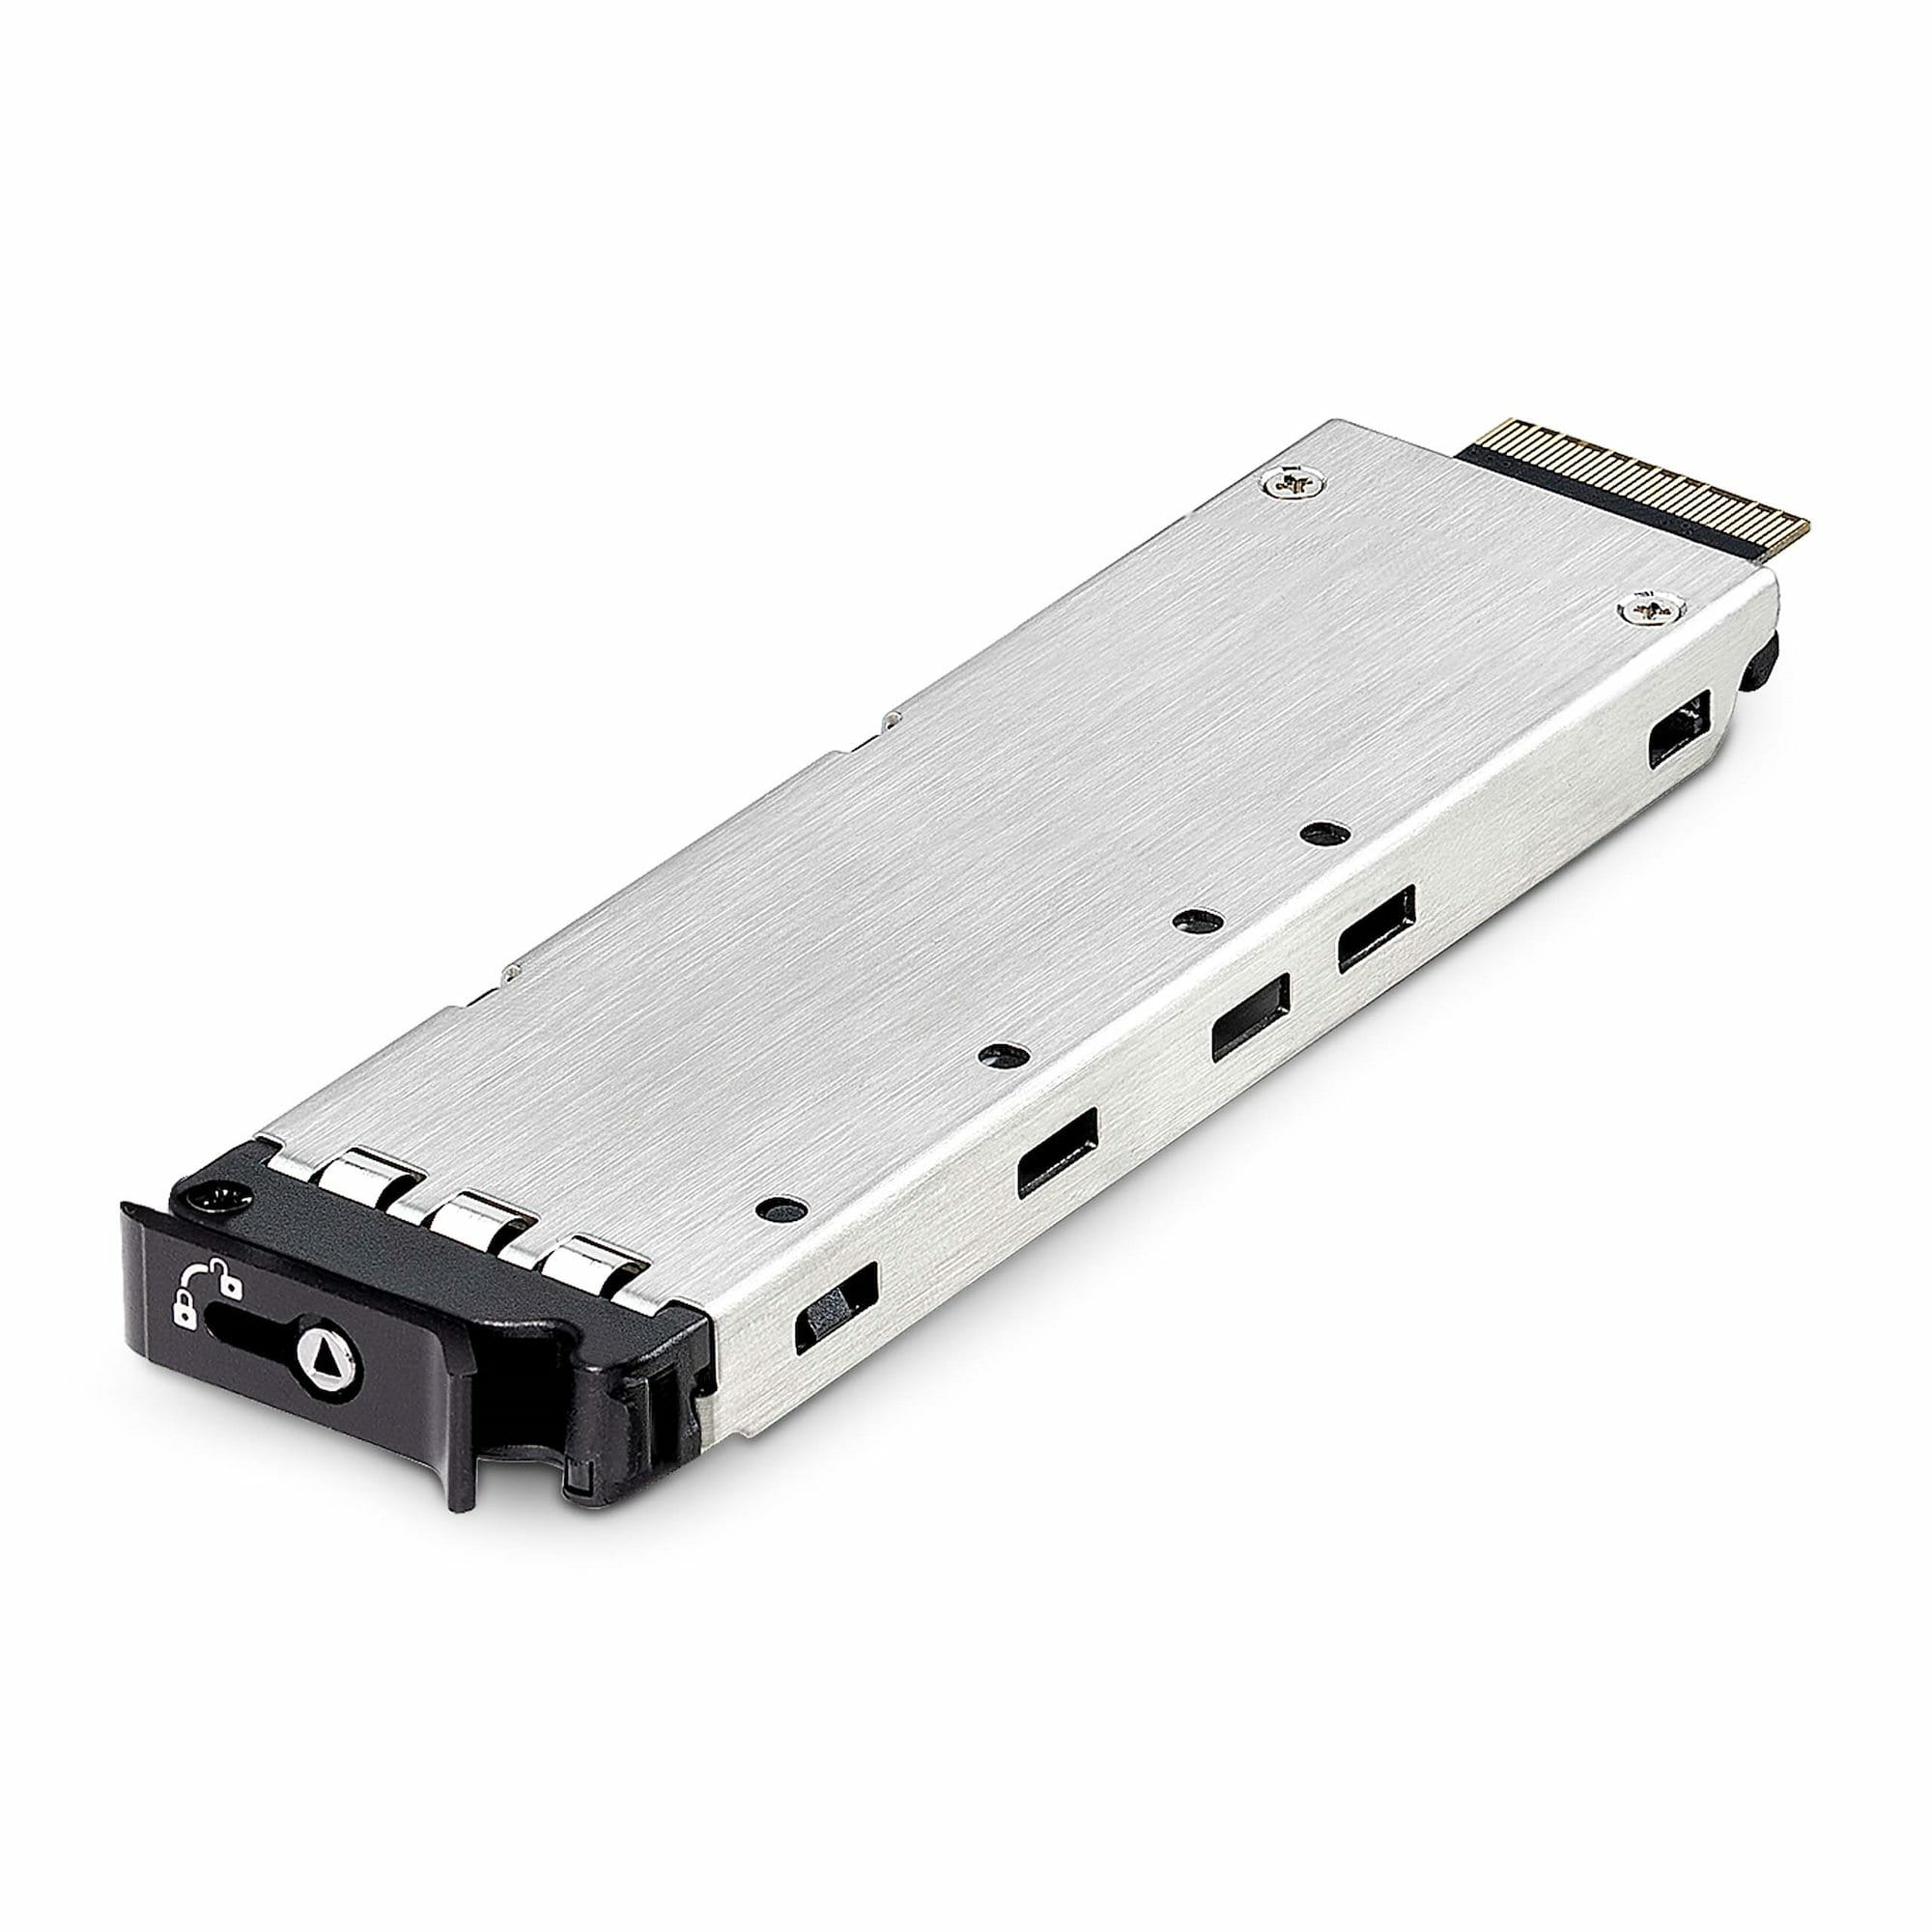 StarTech.com M.2 NVMe SSD Drive Tray for use in PCIe Expansion Product Series - Drive Tray for an Additional Hot Swappable Drive (TR-M2-REMOVABLE-PCIE)